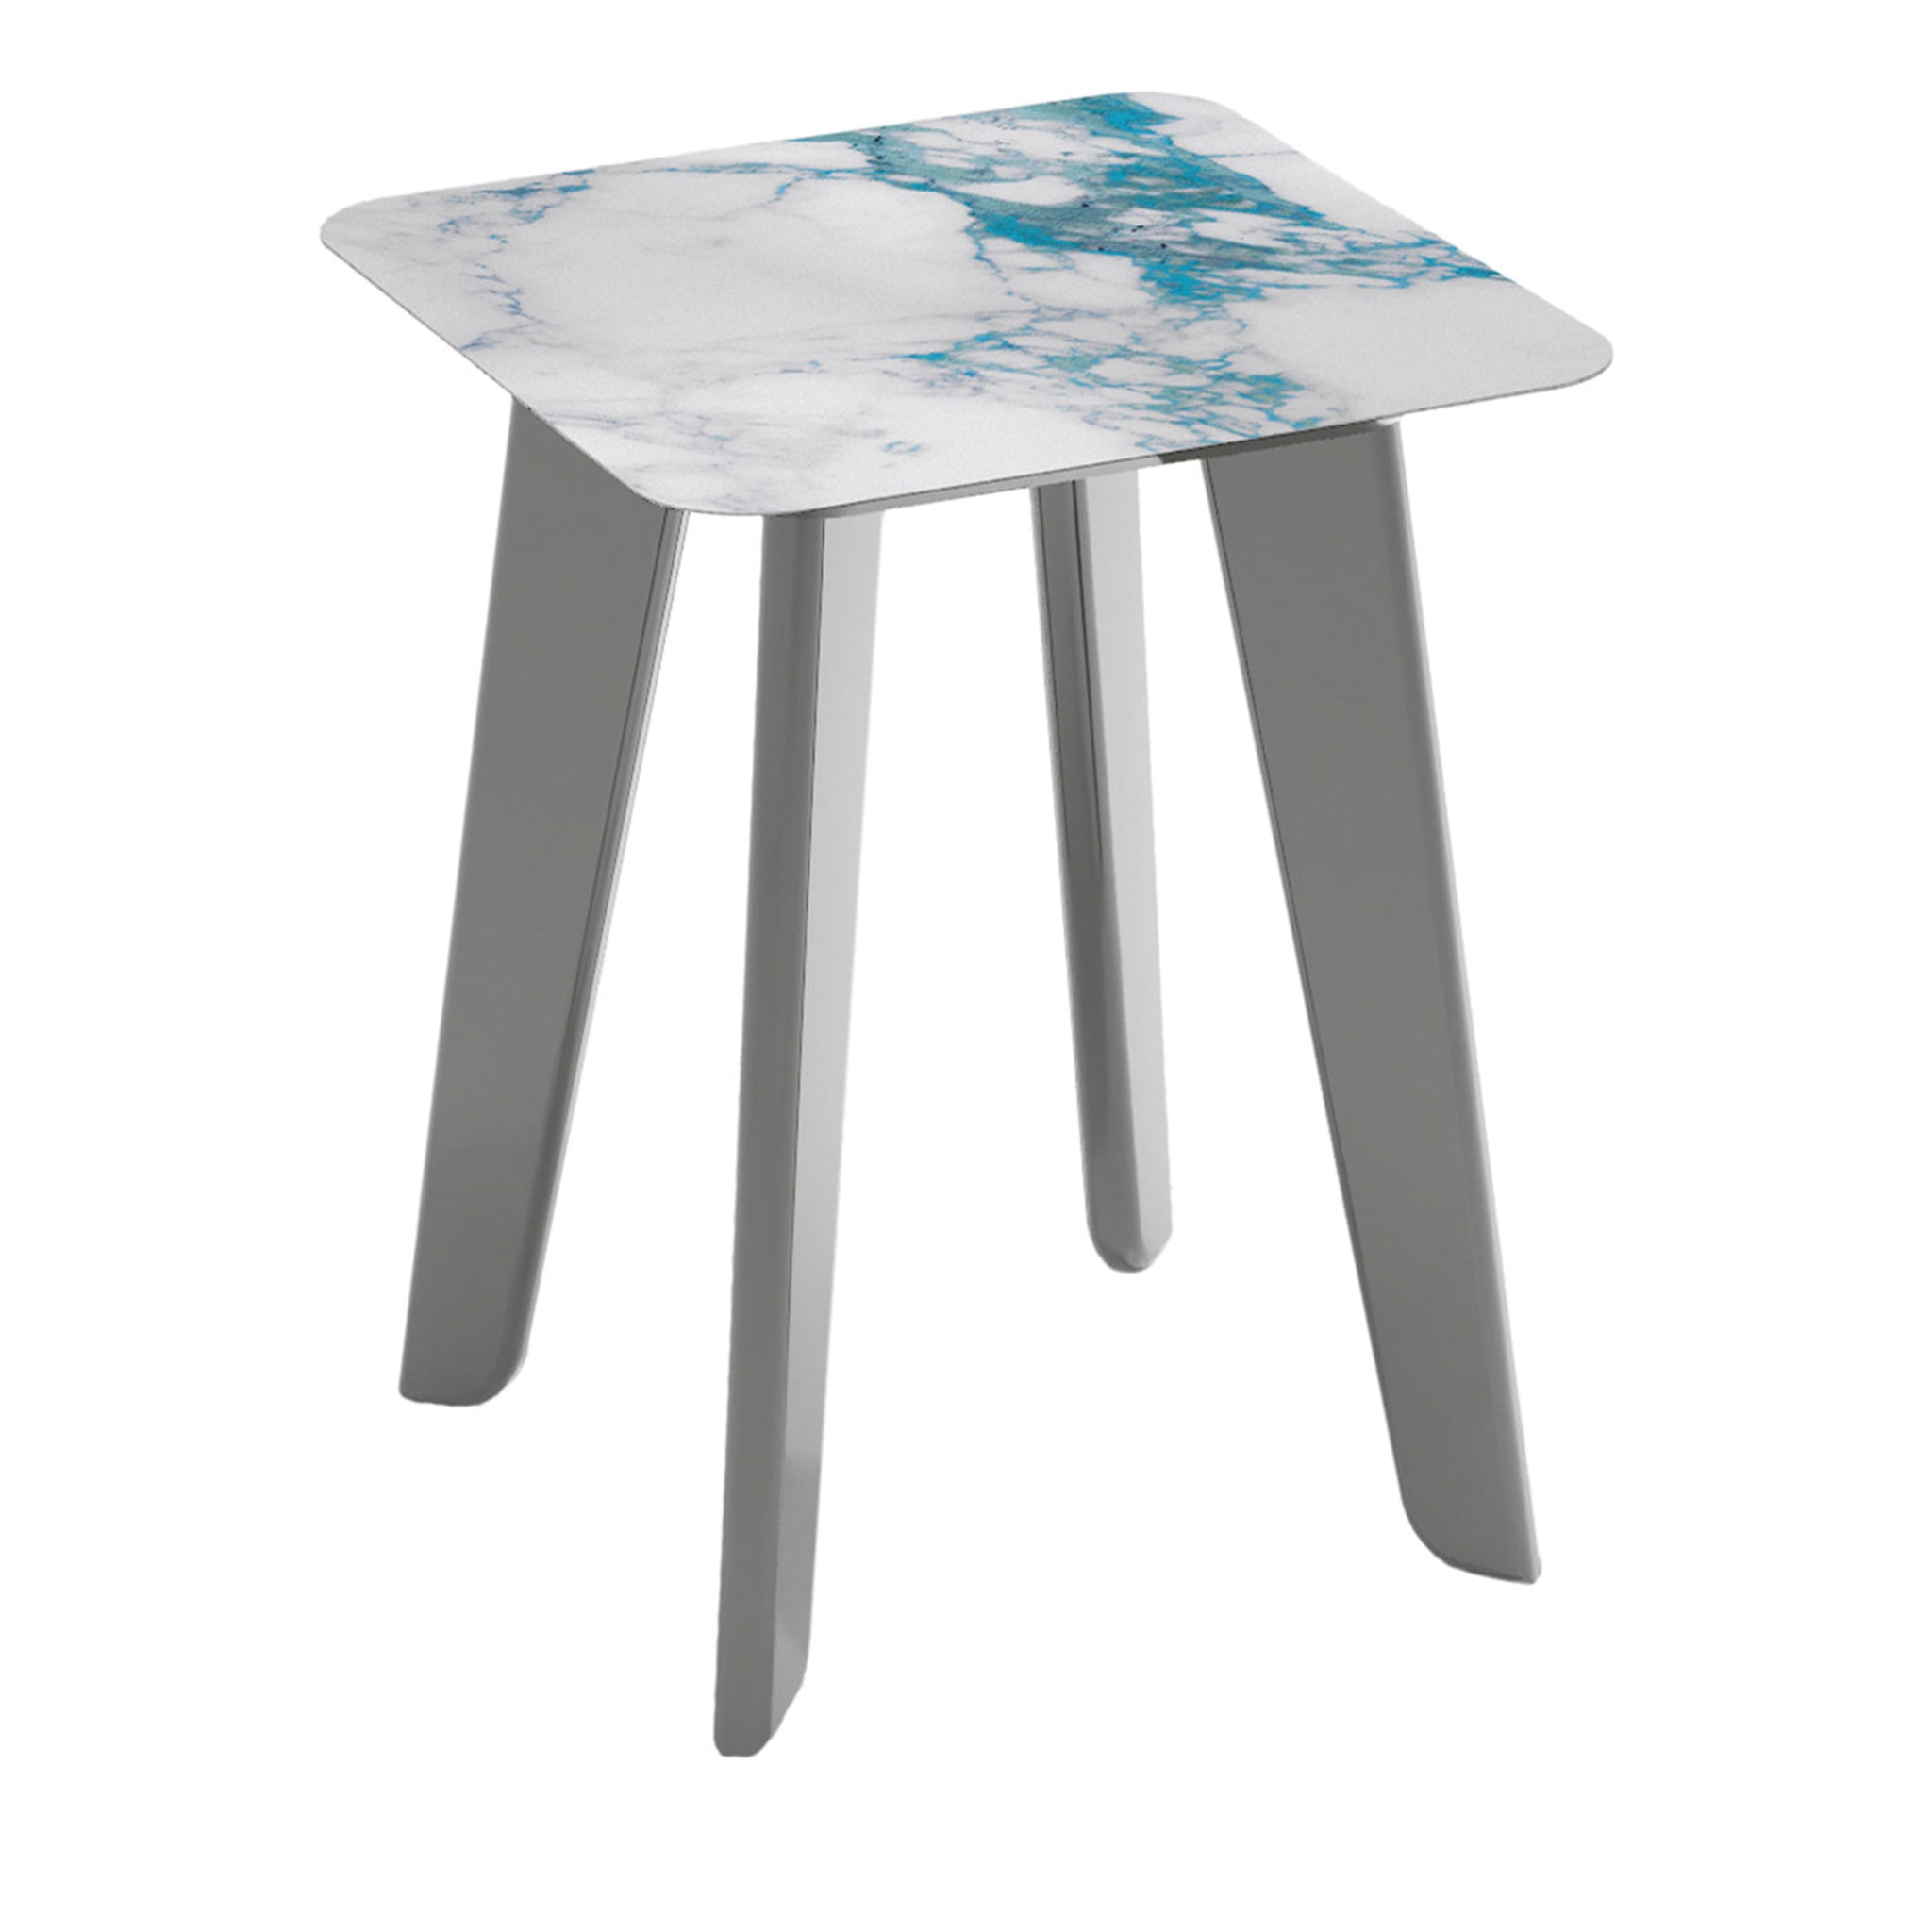 Owen Tall Square Side Table with White and Turquoise Top - Main view